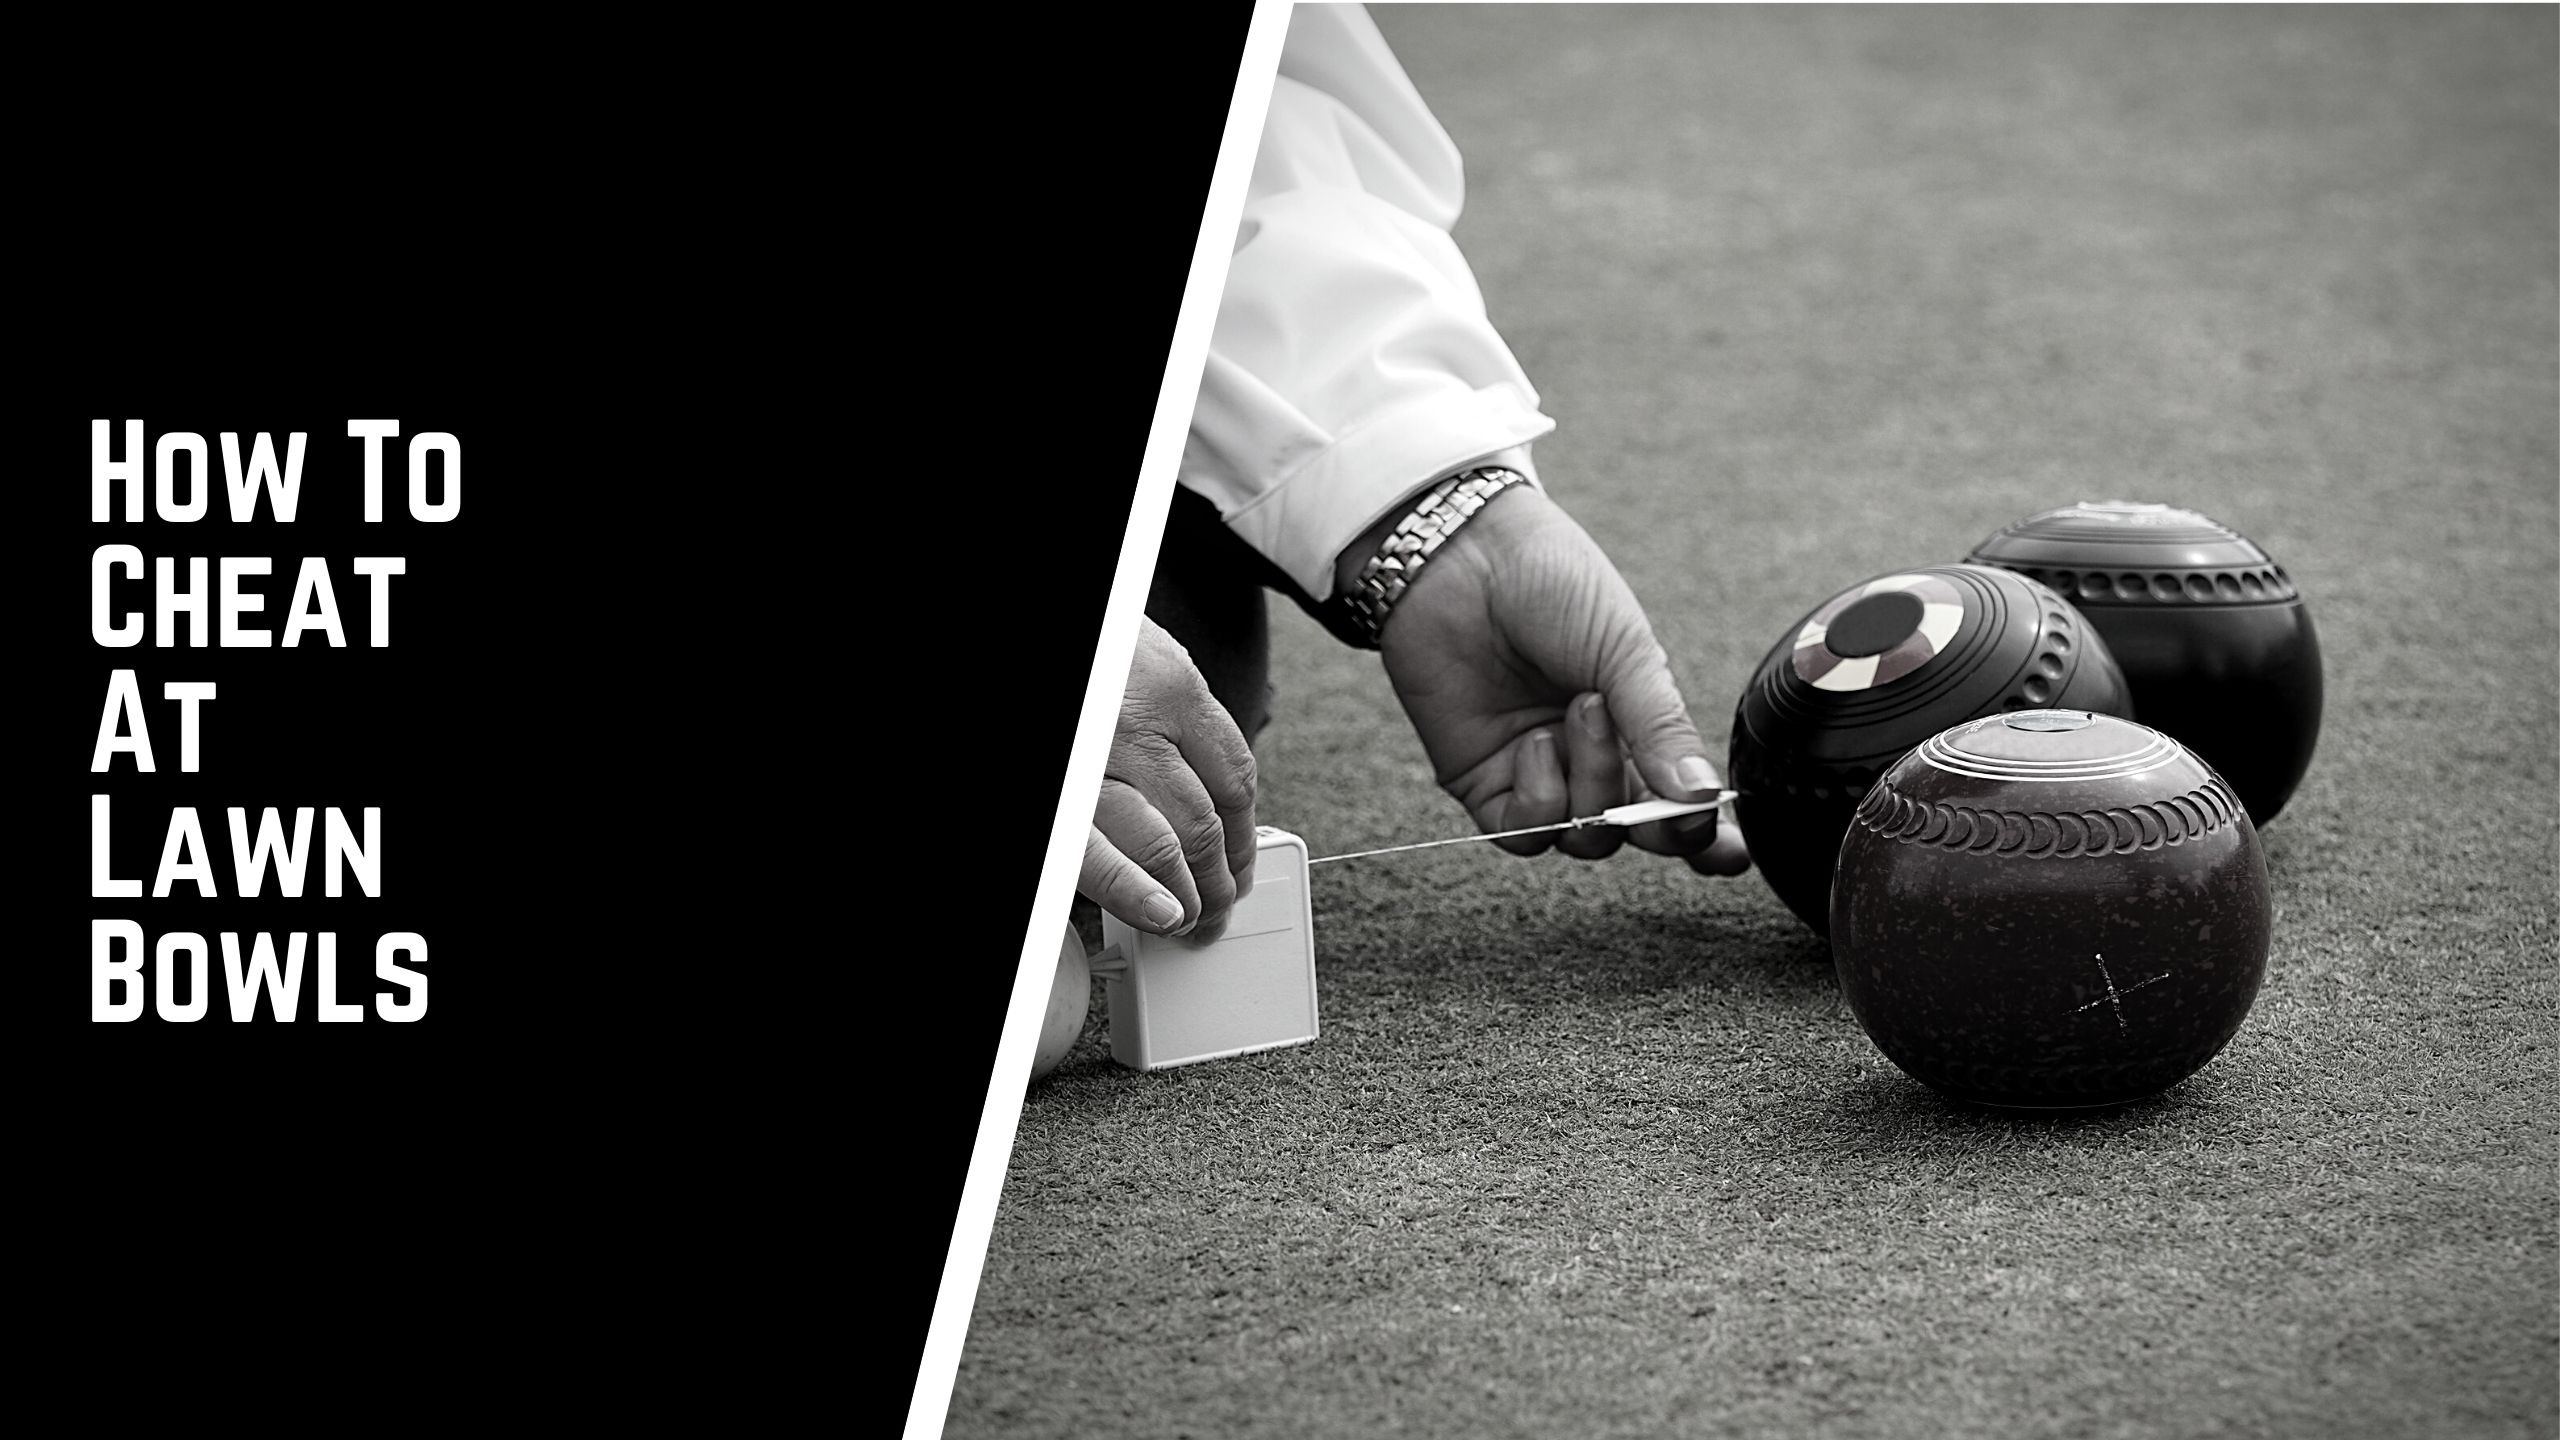 How To Cheat At Lawn Bowls